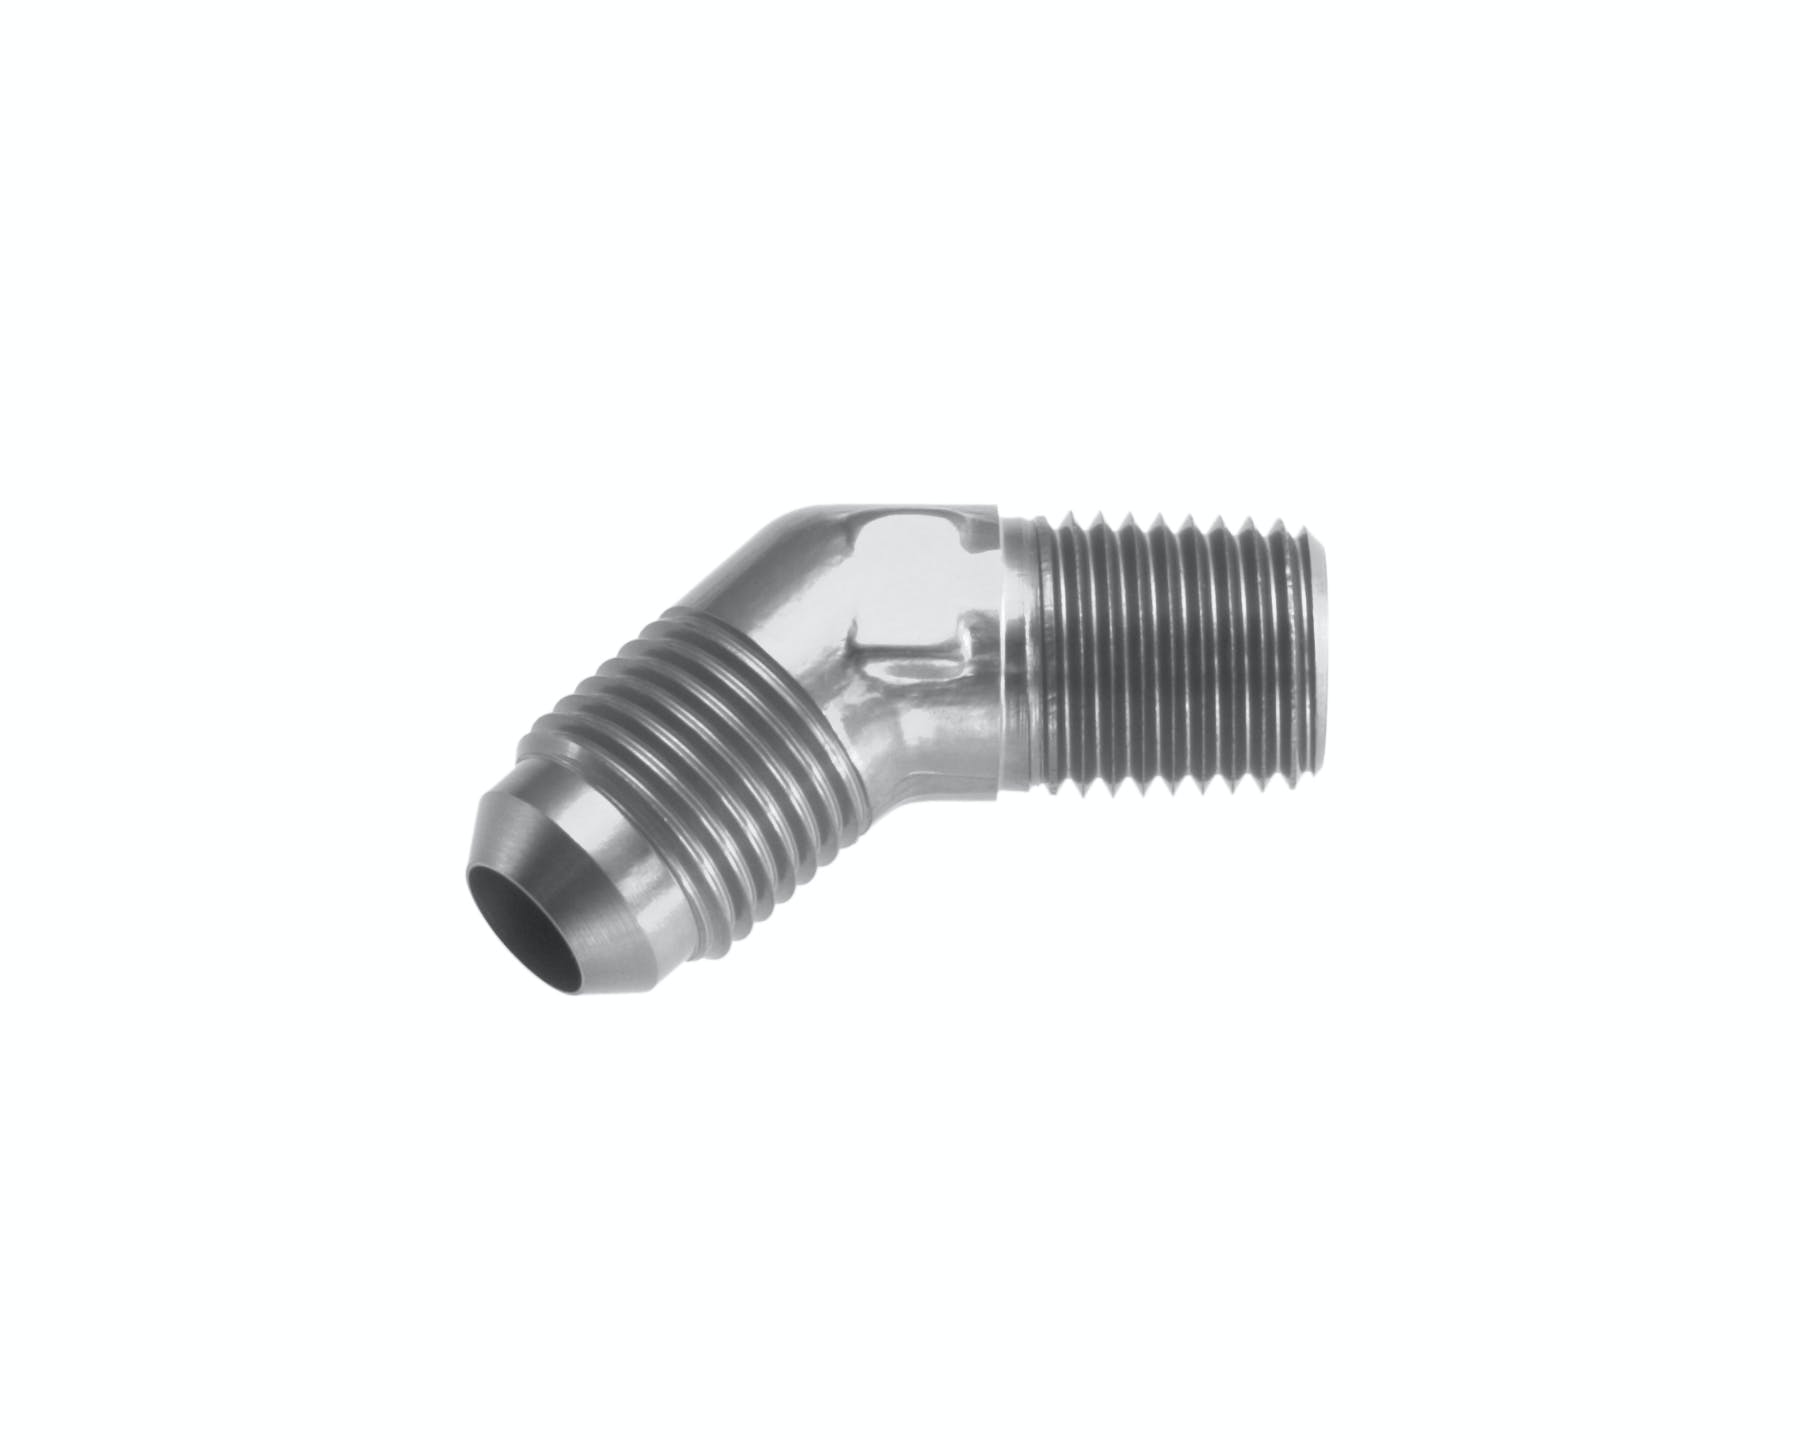 Redhorse Performance 823-04-06-5 -04 45 degree Male adapter to -06 (3/8in) NPT Male - clear